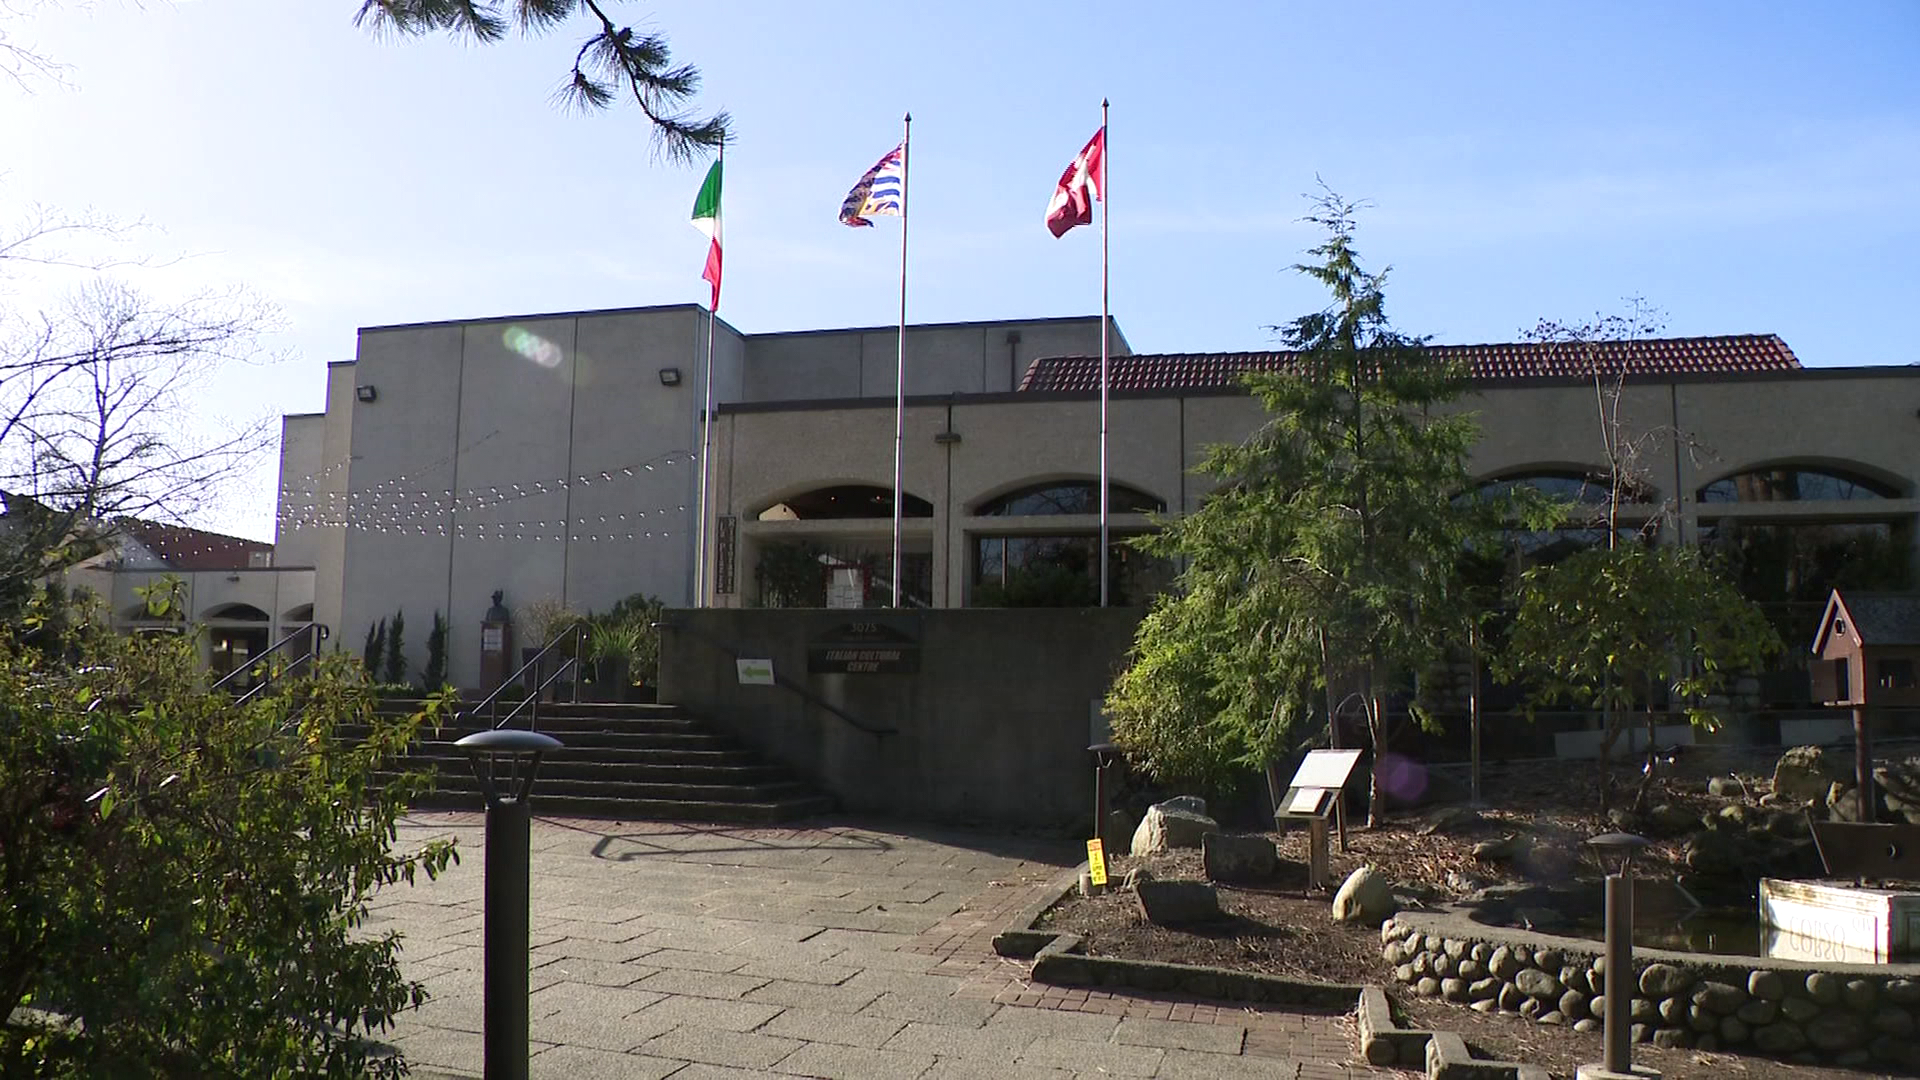 The Italian Cultural Centre, located on Grandview Highway and Slocan Street, says it is against the rezoning application which is currently before council that would see a Permanent Modular Supportive Housing Initiative (PMHSI) placed just a block away. CityNews Image)